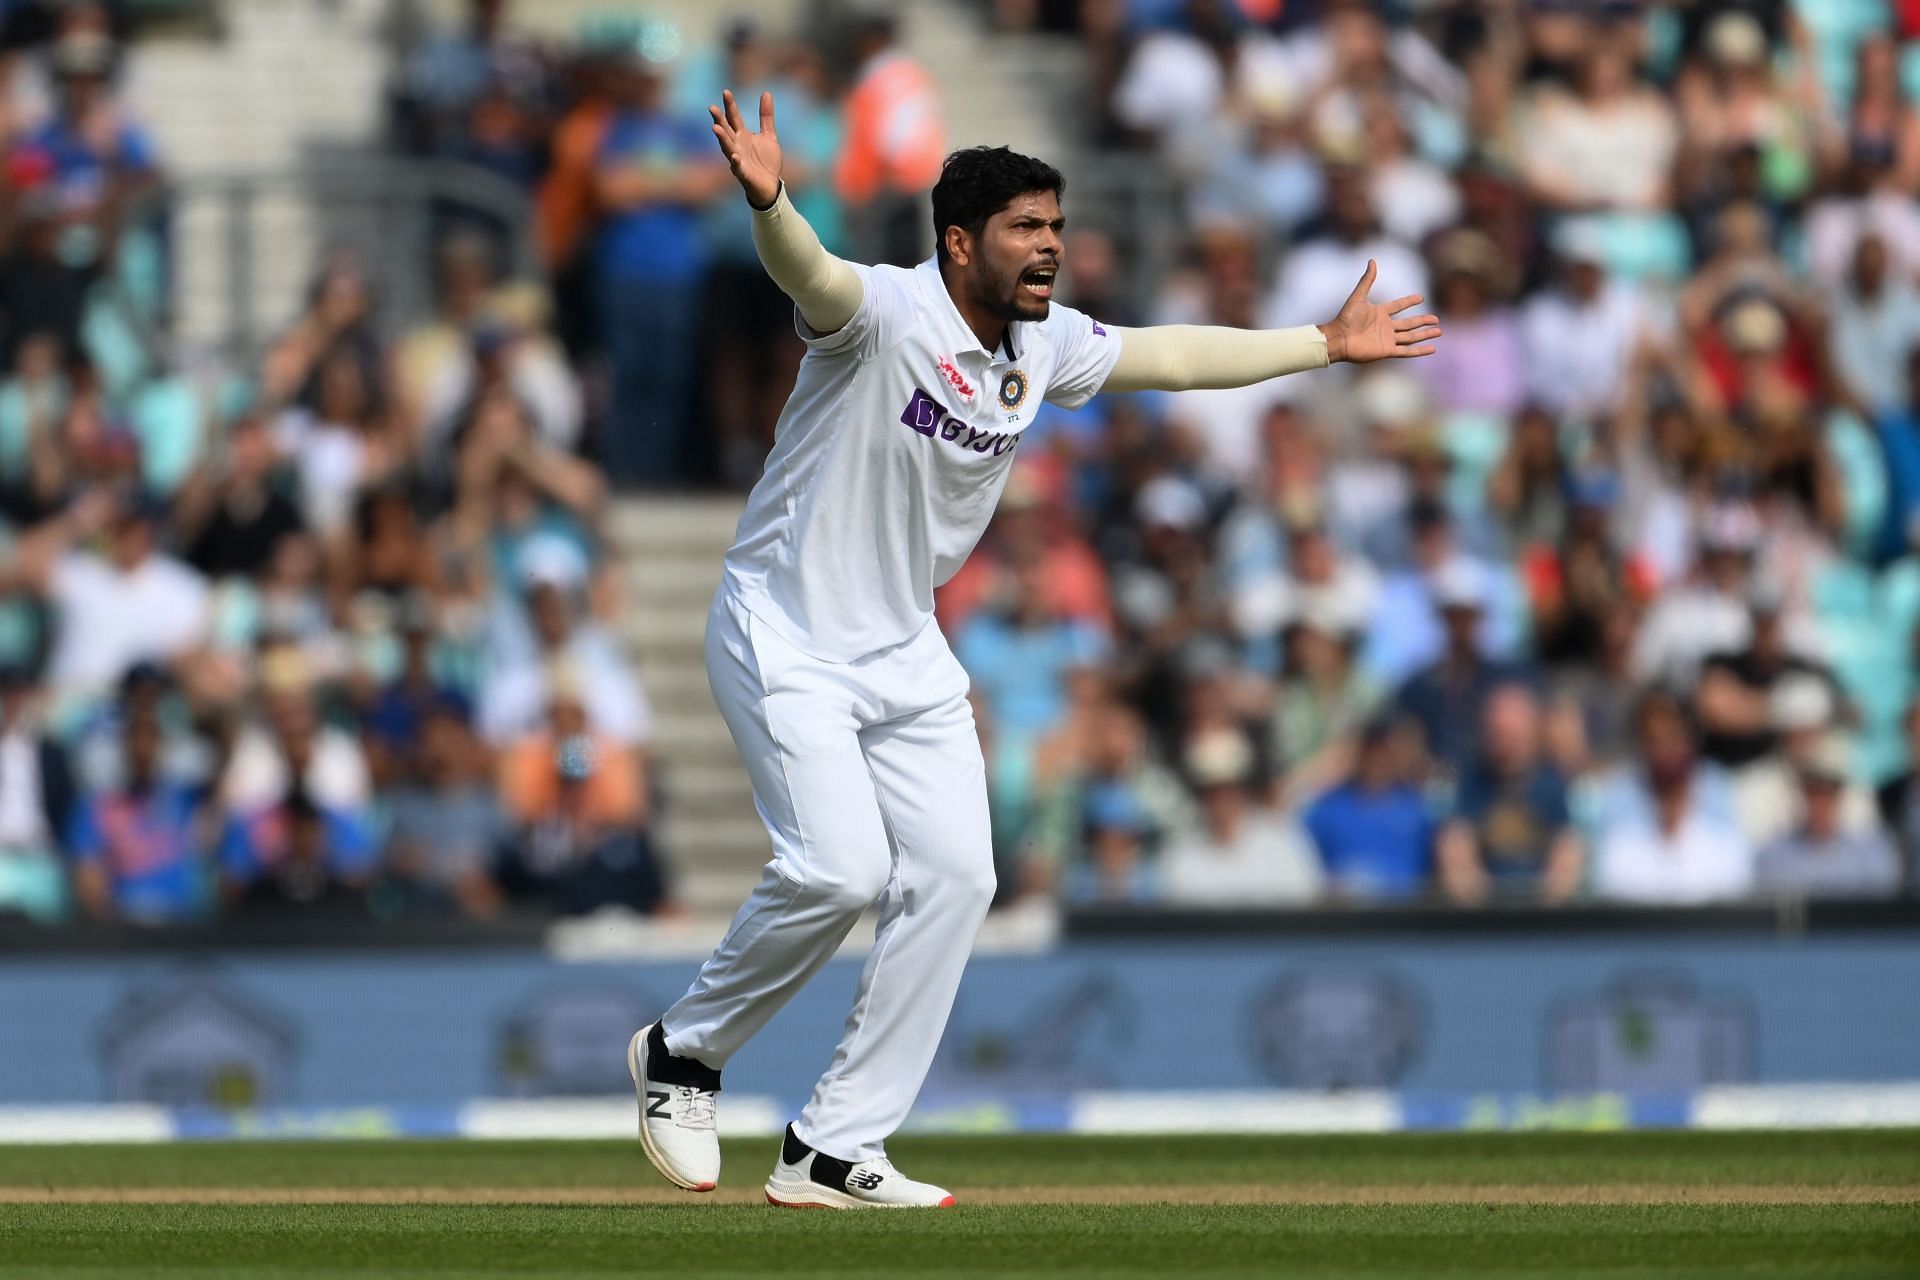 England v India - Fourth LV = Insurance Test Match: Day Five